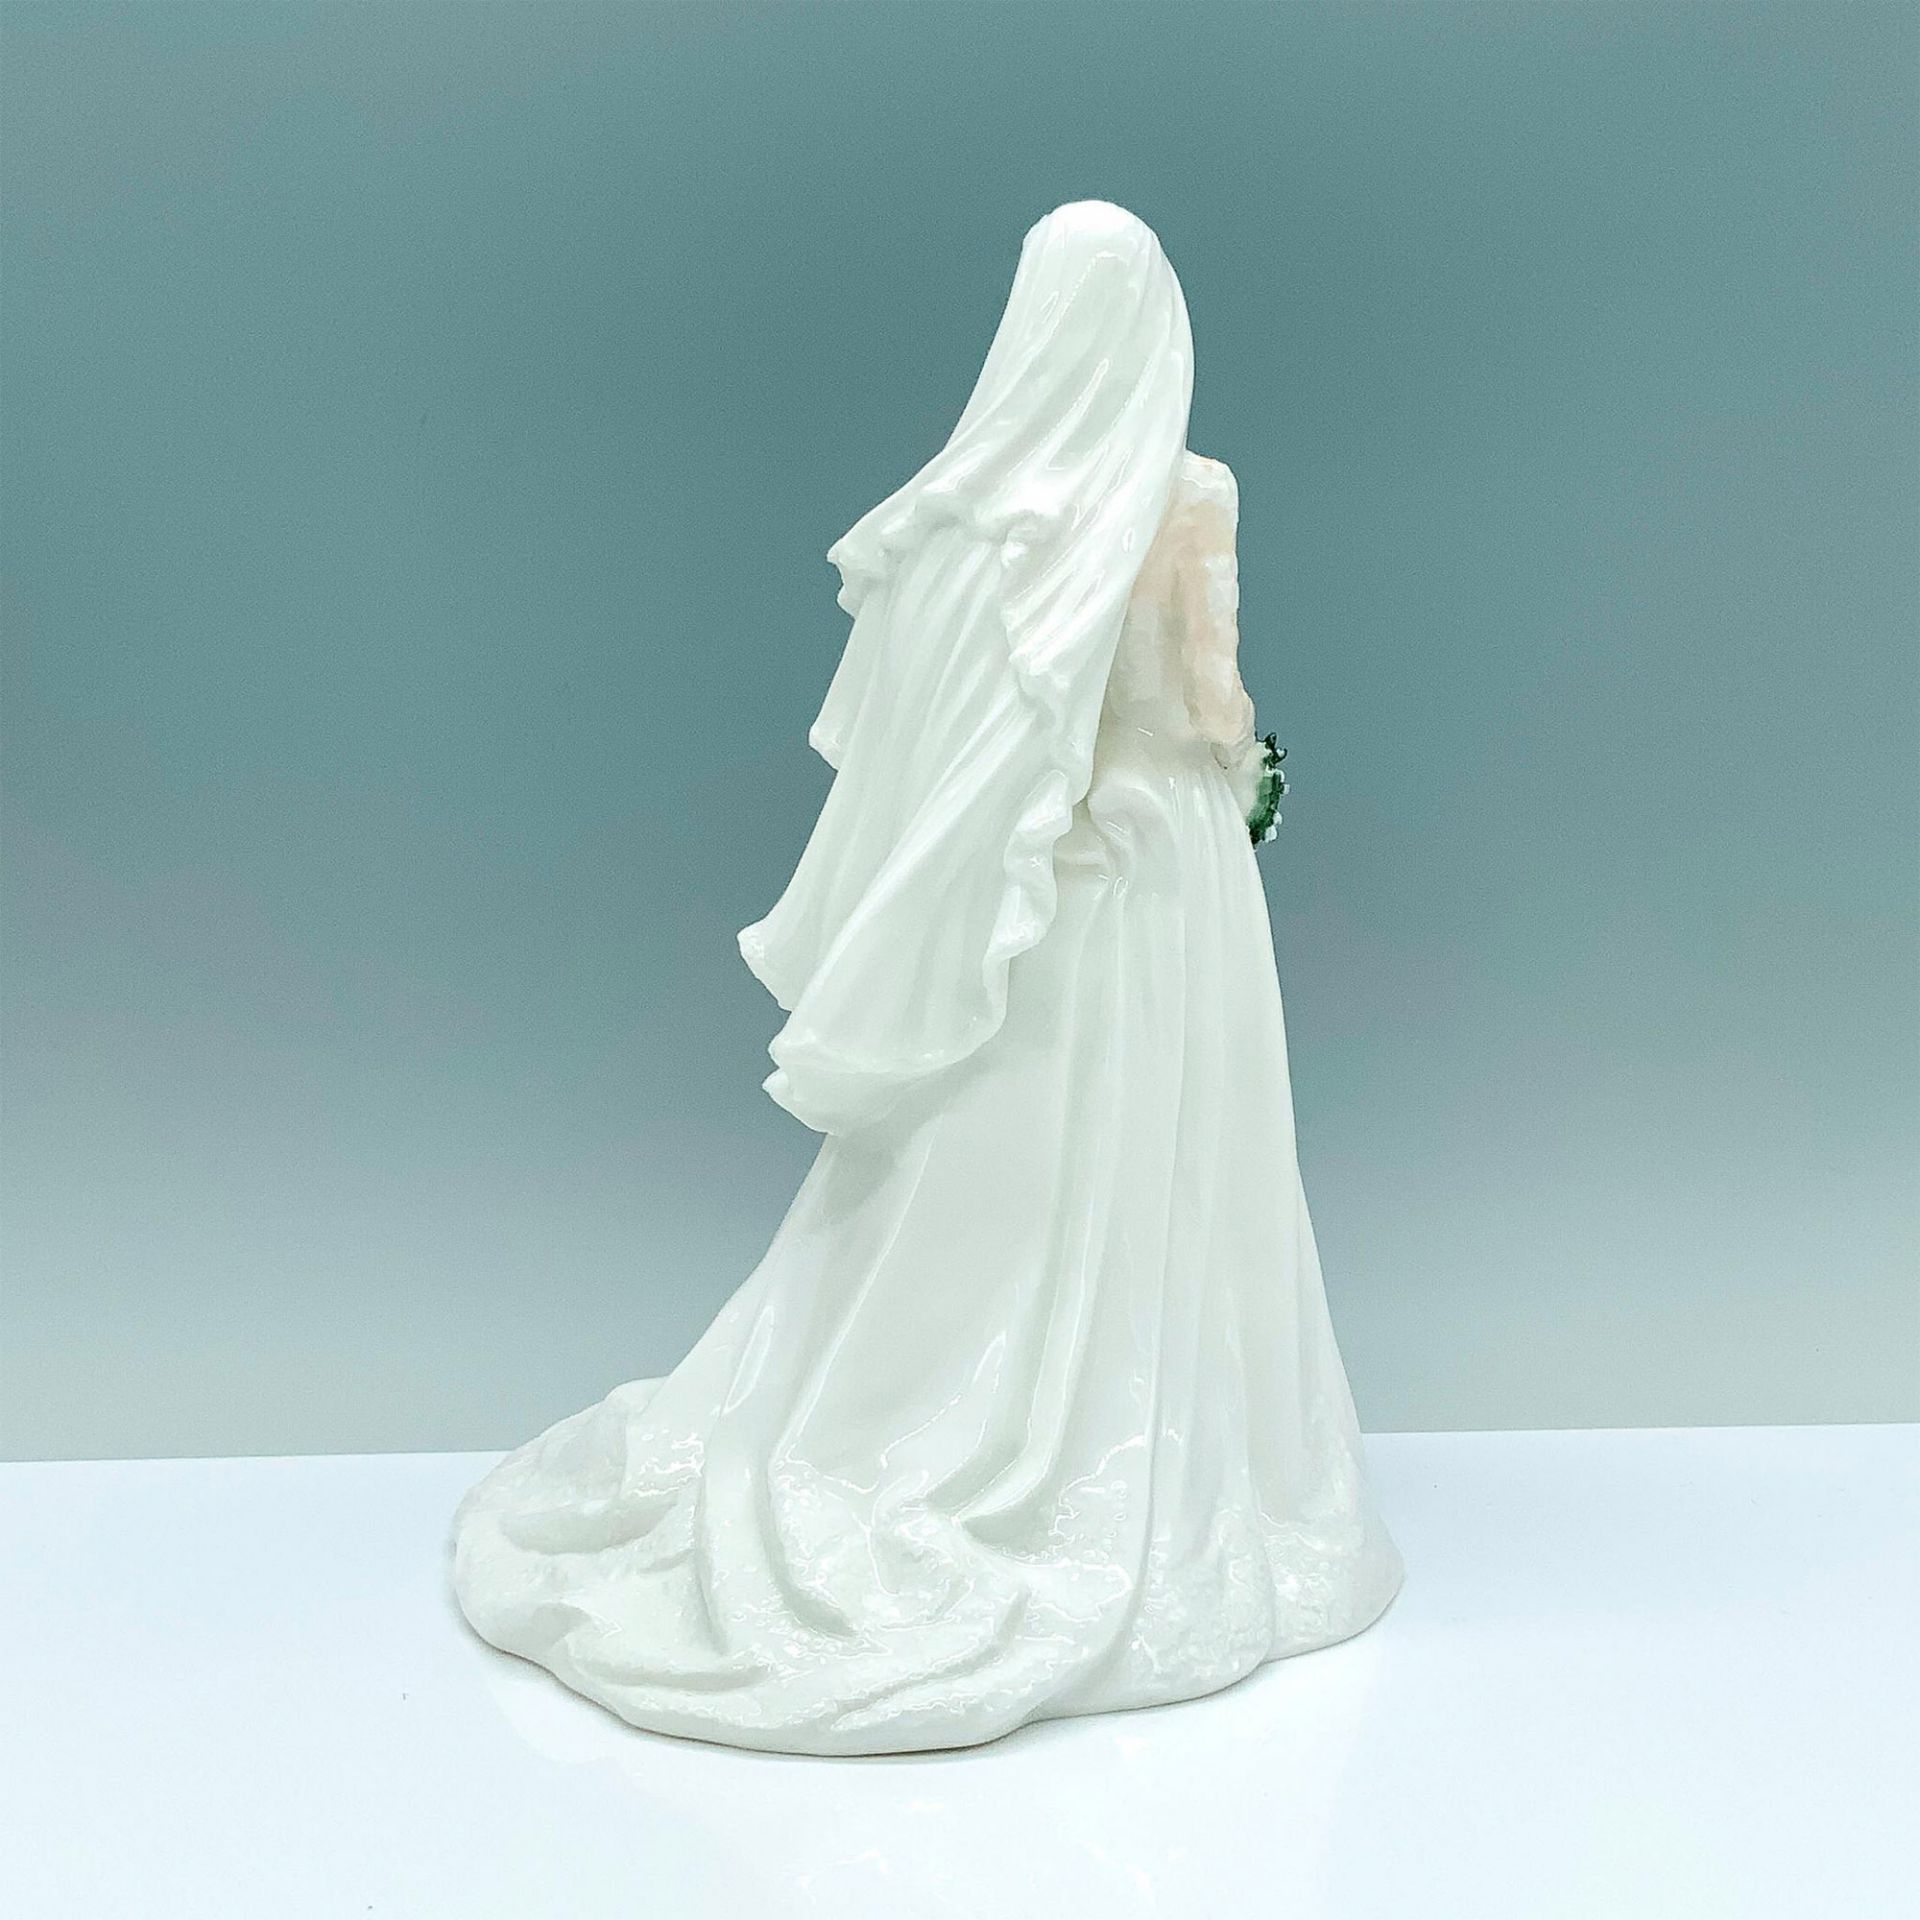 Limited Ed. The Figurine Collective Figure, Kate Middleton - Image 2 of 3